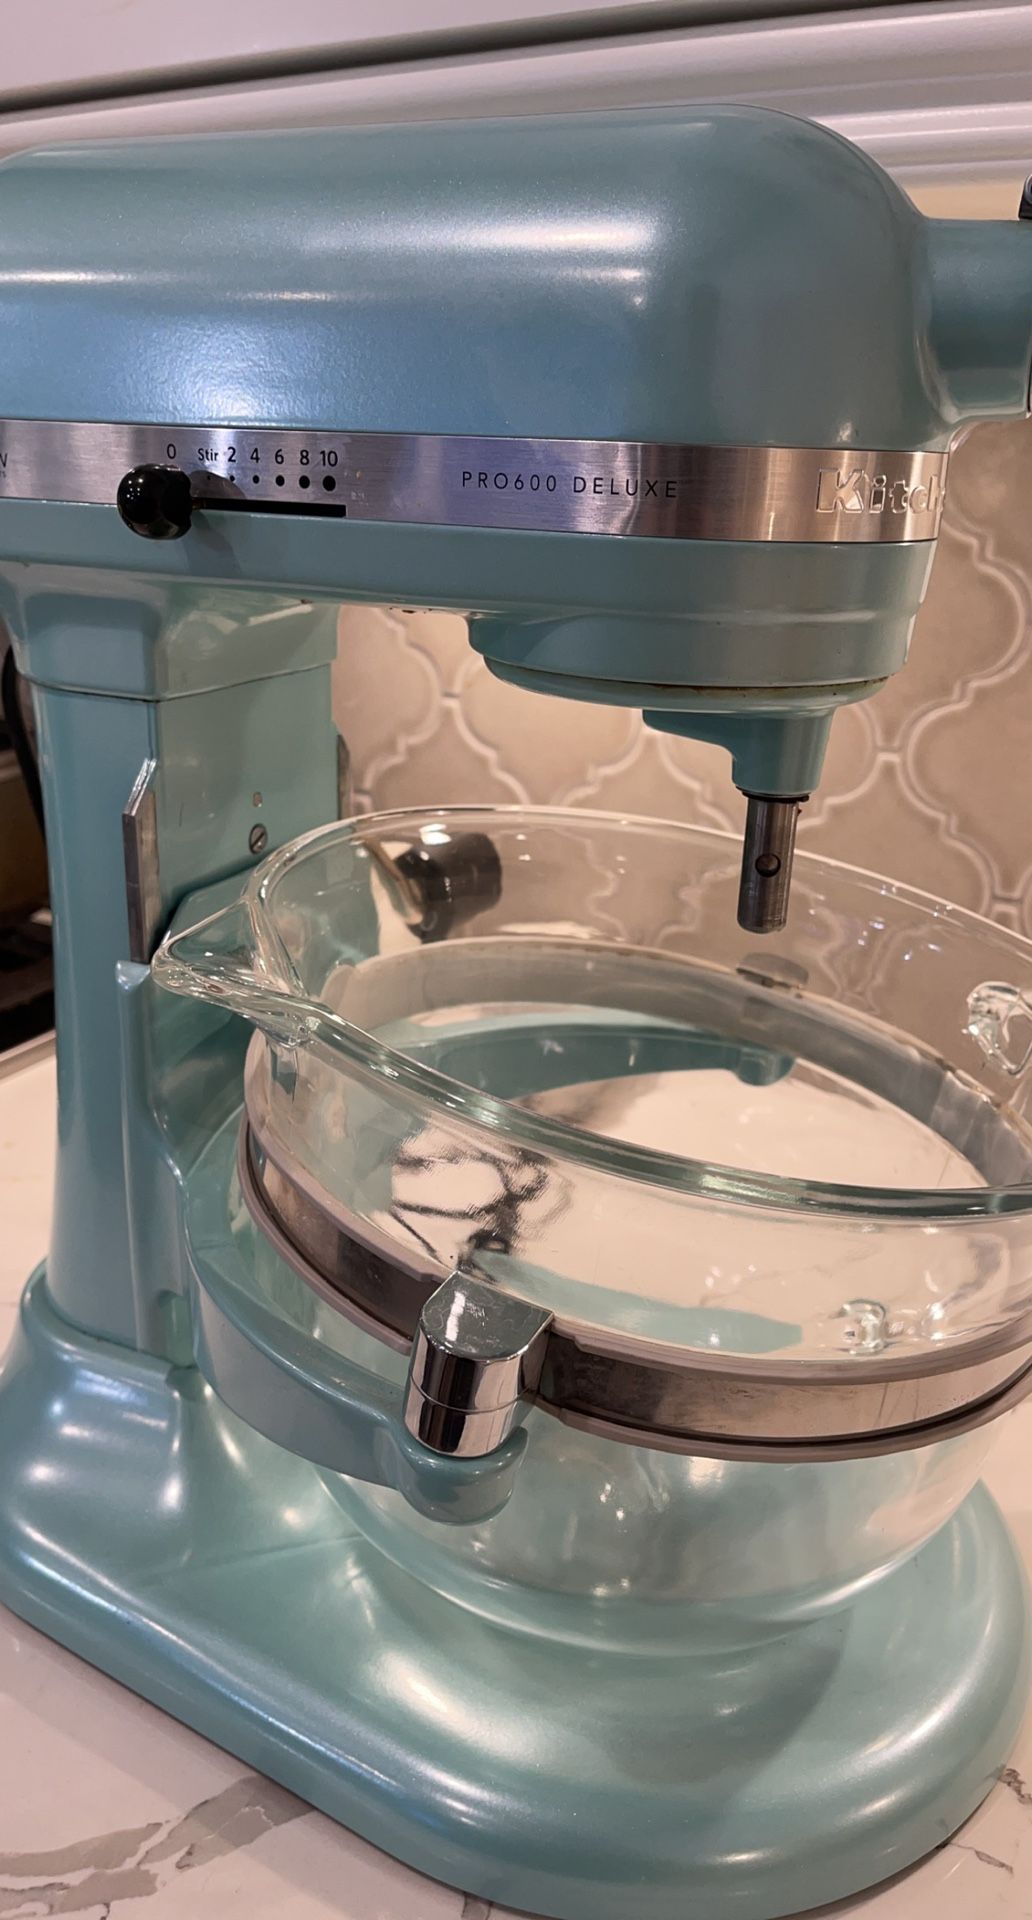 Kitchen Aid 5-Qt Tilt-Heas Stand Mixer With Glass Bowl CRYSTAL BLUE for  Sale in York, PA - OfferUp